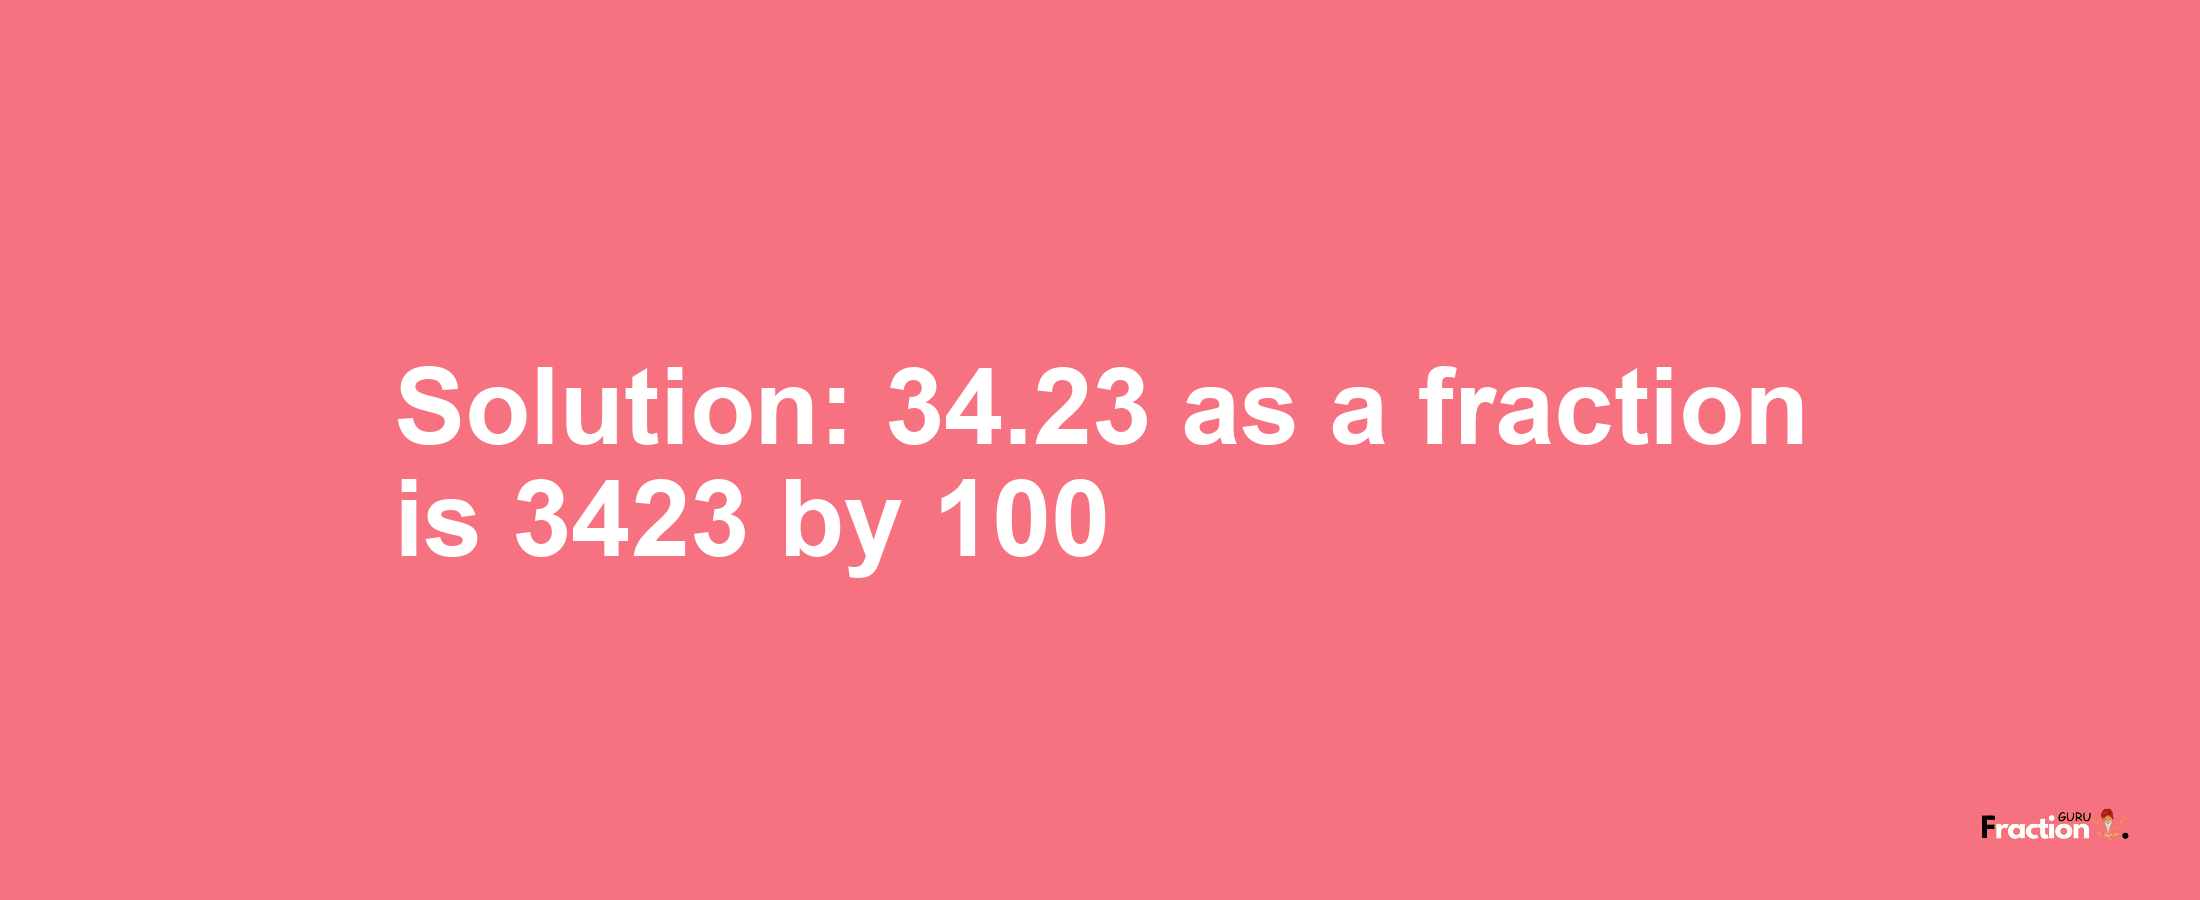 Solution:34.23 as a fraction is 3423/100